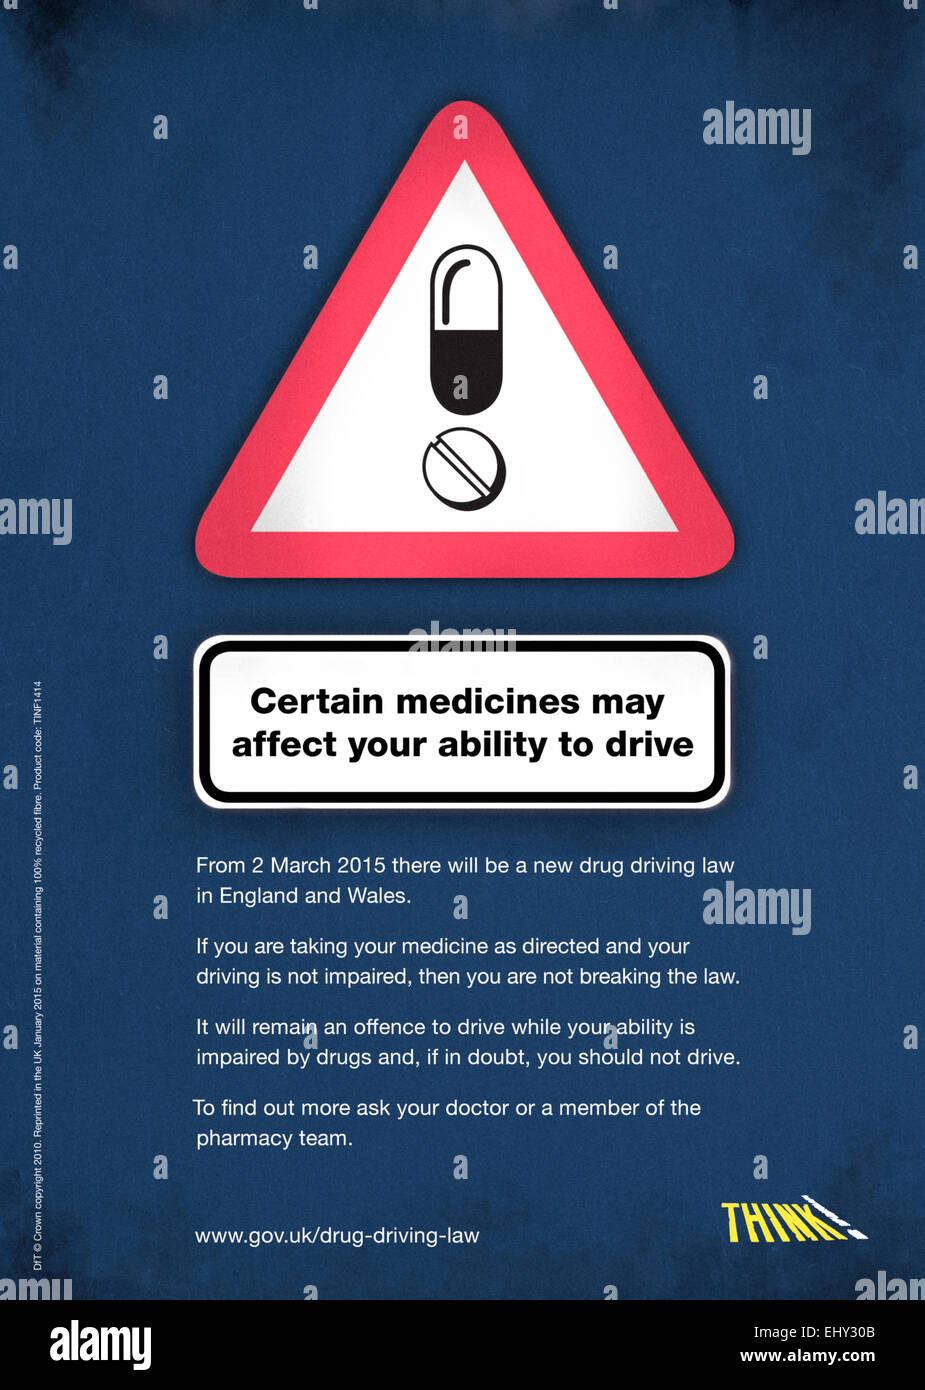 'Certain medicines may affect your ability to drive' Poster from United Kingdom's THINK! road safety campaign. See description for more information. Stock Photo